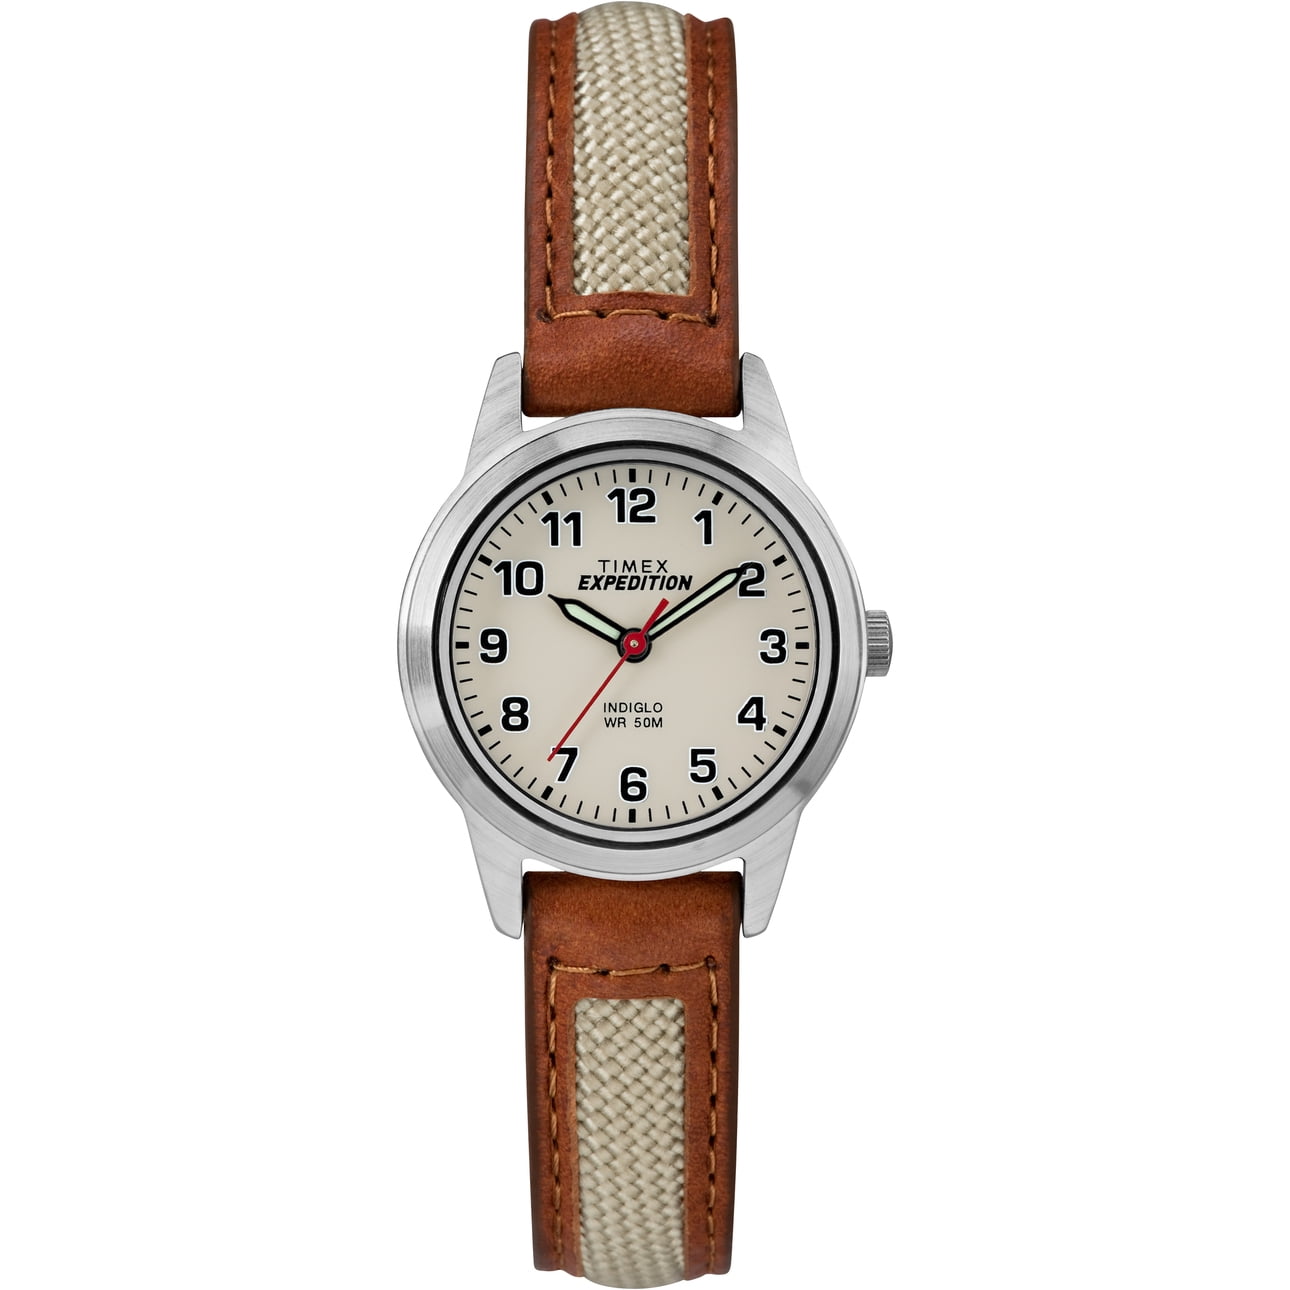 Timex Women's Expedition Field Mini Beige/Natural 26mm Outdoor Watch, Leather & Fabric Strap